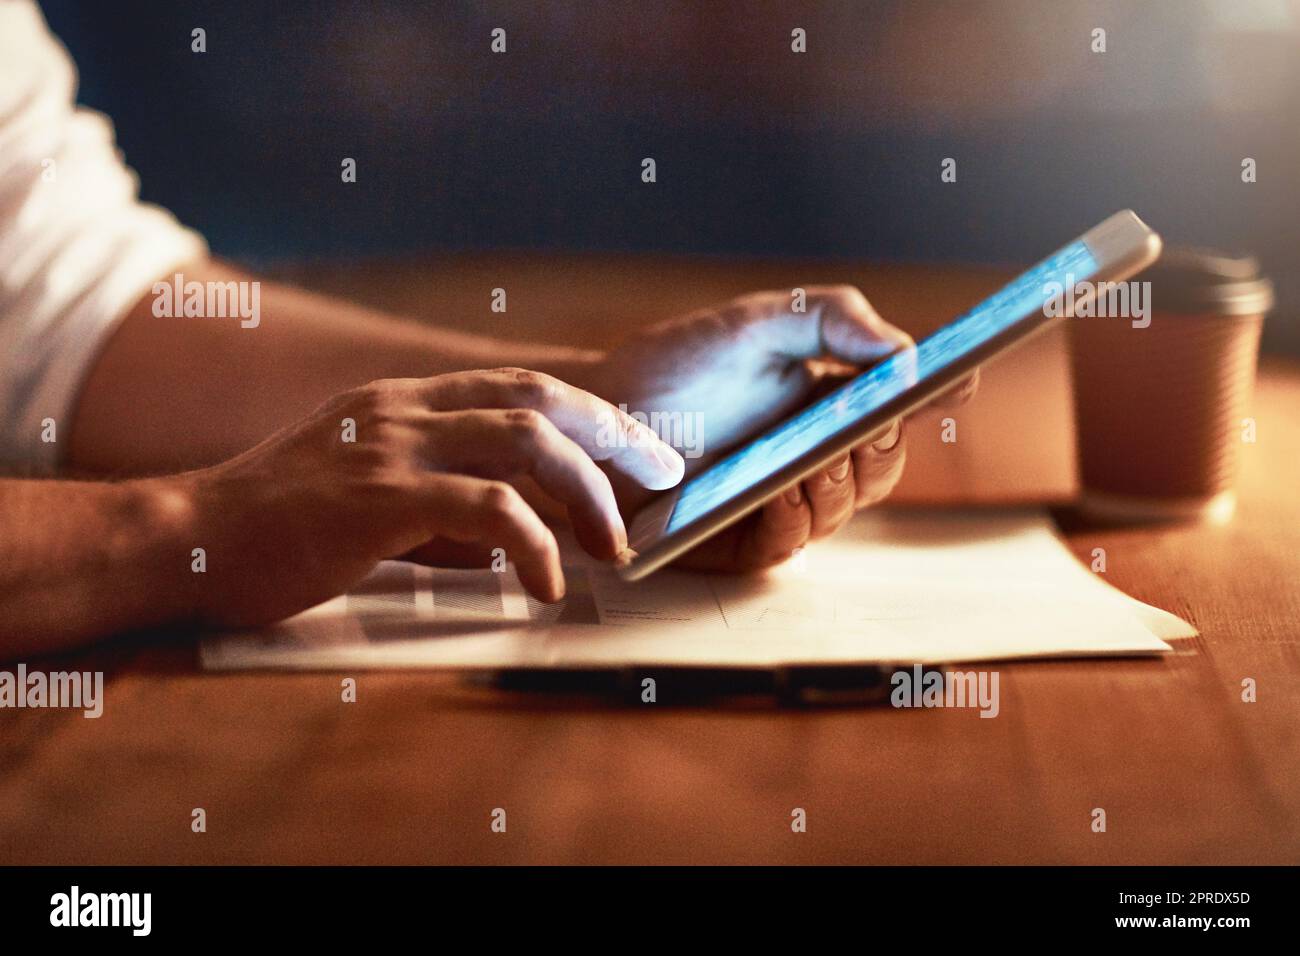 Closeup of a persons hands holding and scrolling on a digital tablet planning late in the evening at night. Modern man working online with a touchscreen display device, at desk of workplace Stock Photo